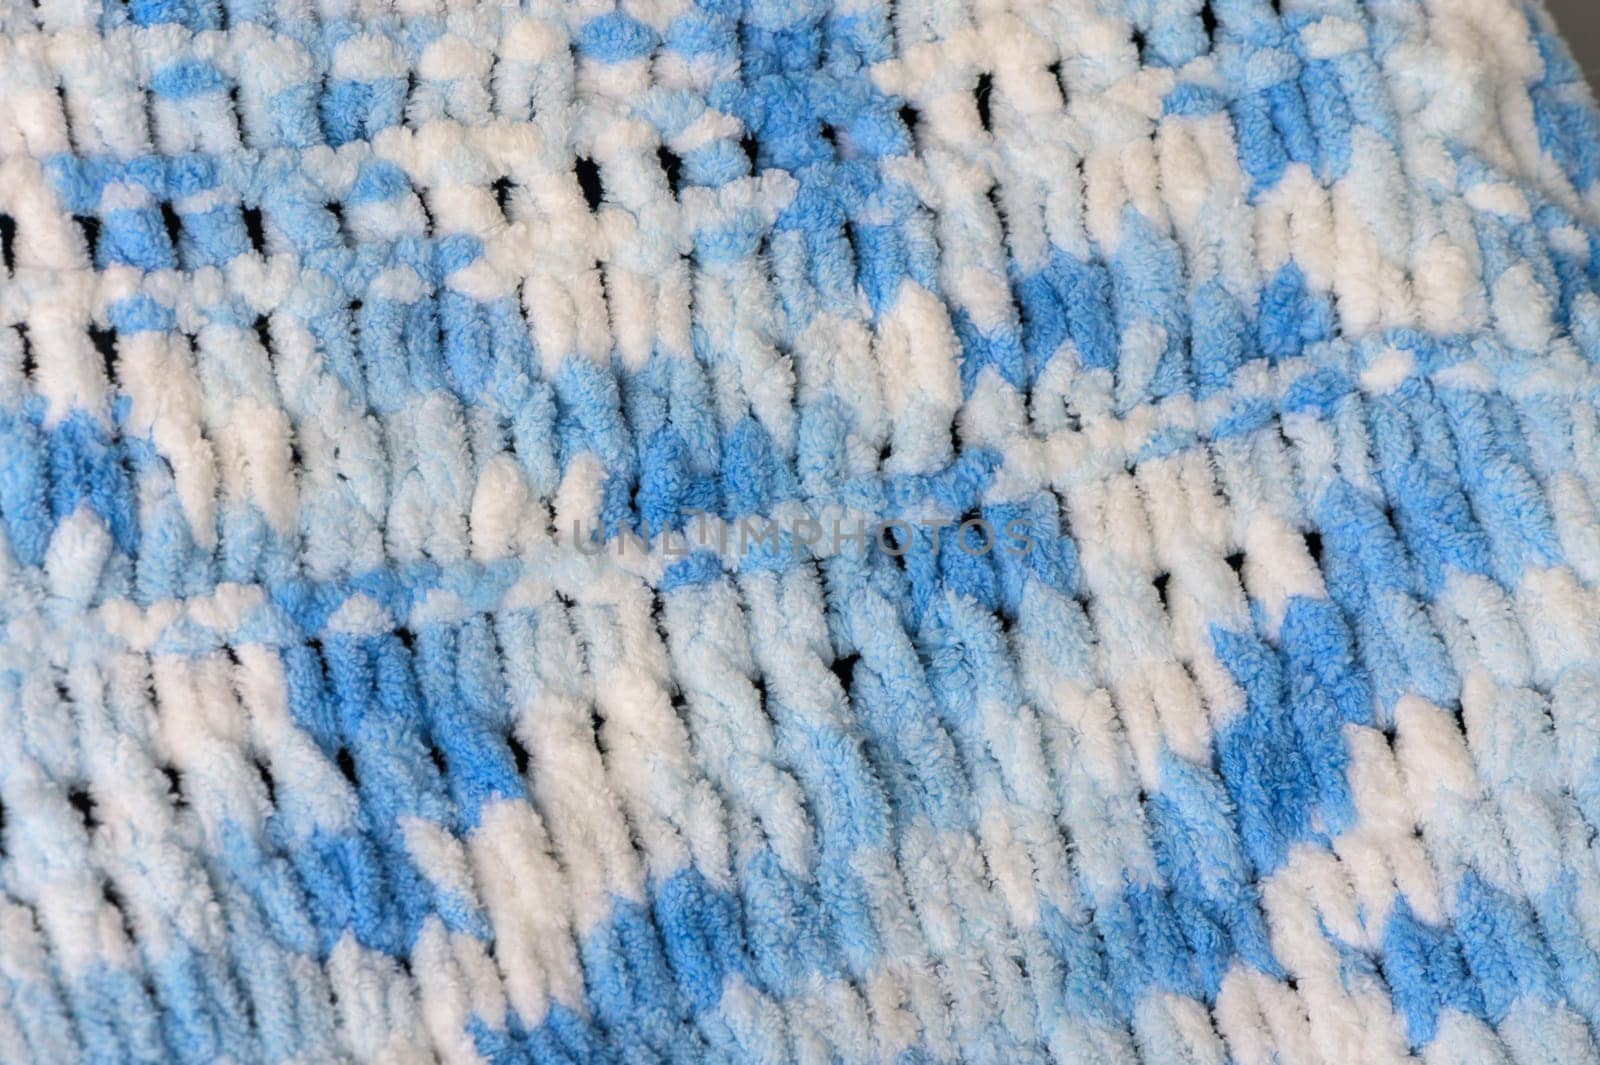 woolen blanket as a background in the photo 4